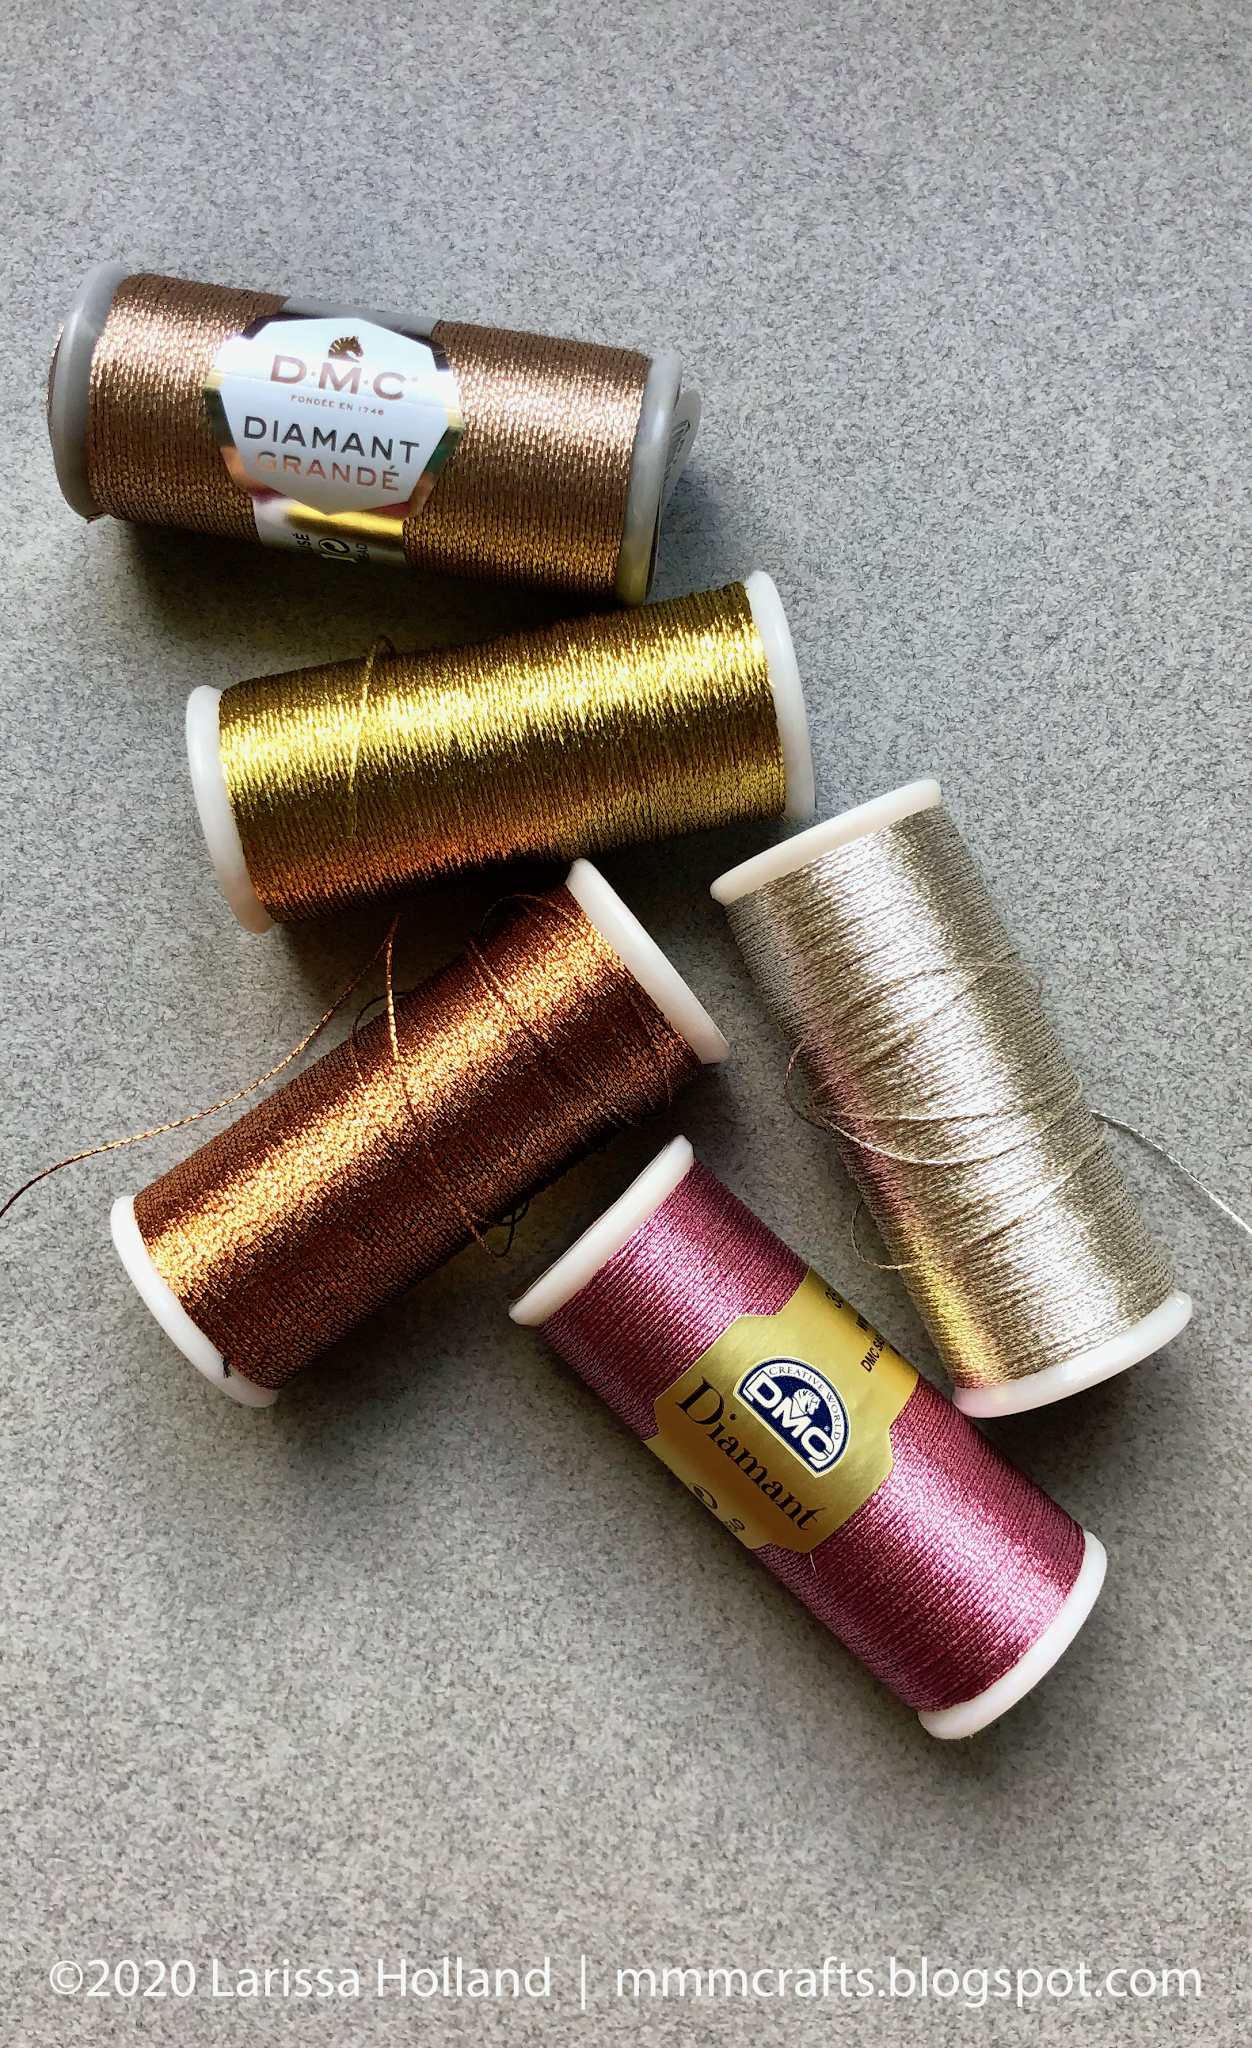 mmmcrafts: the skinny on metallic thread and flosses